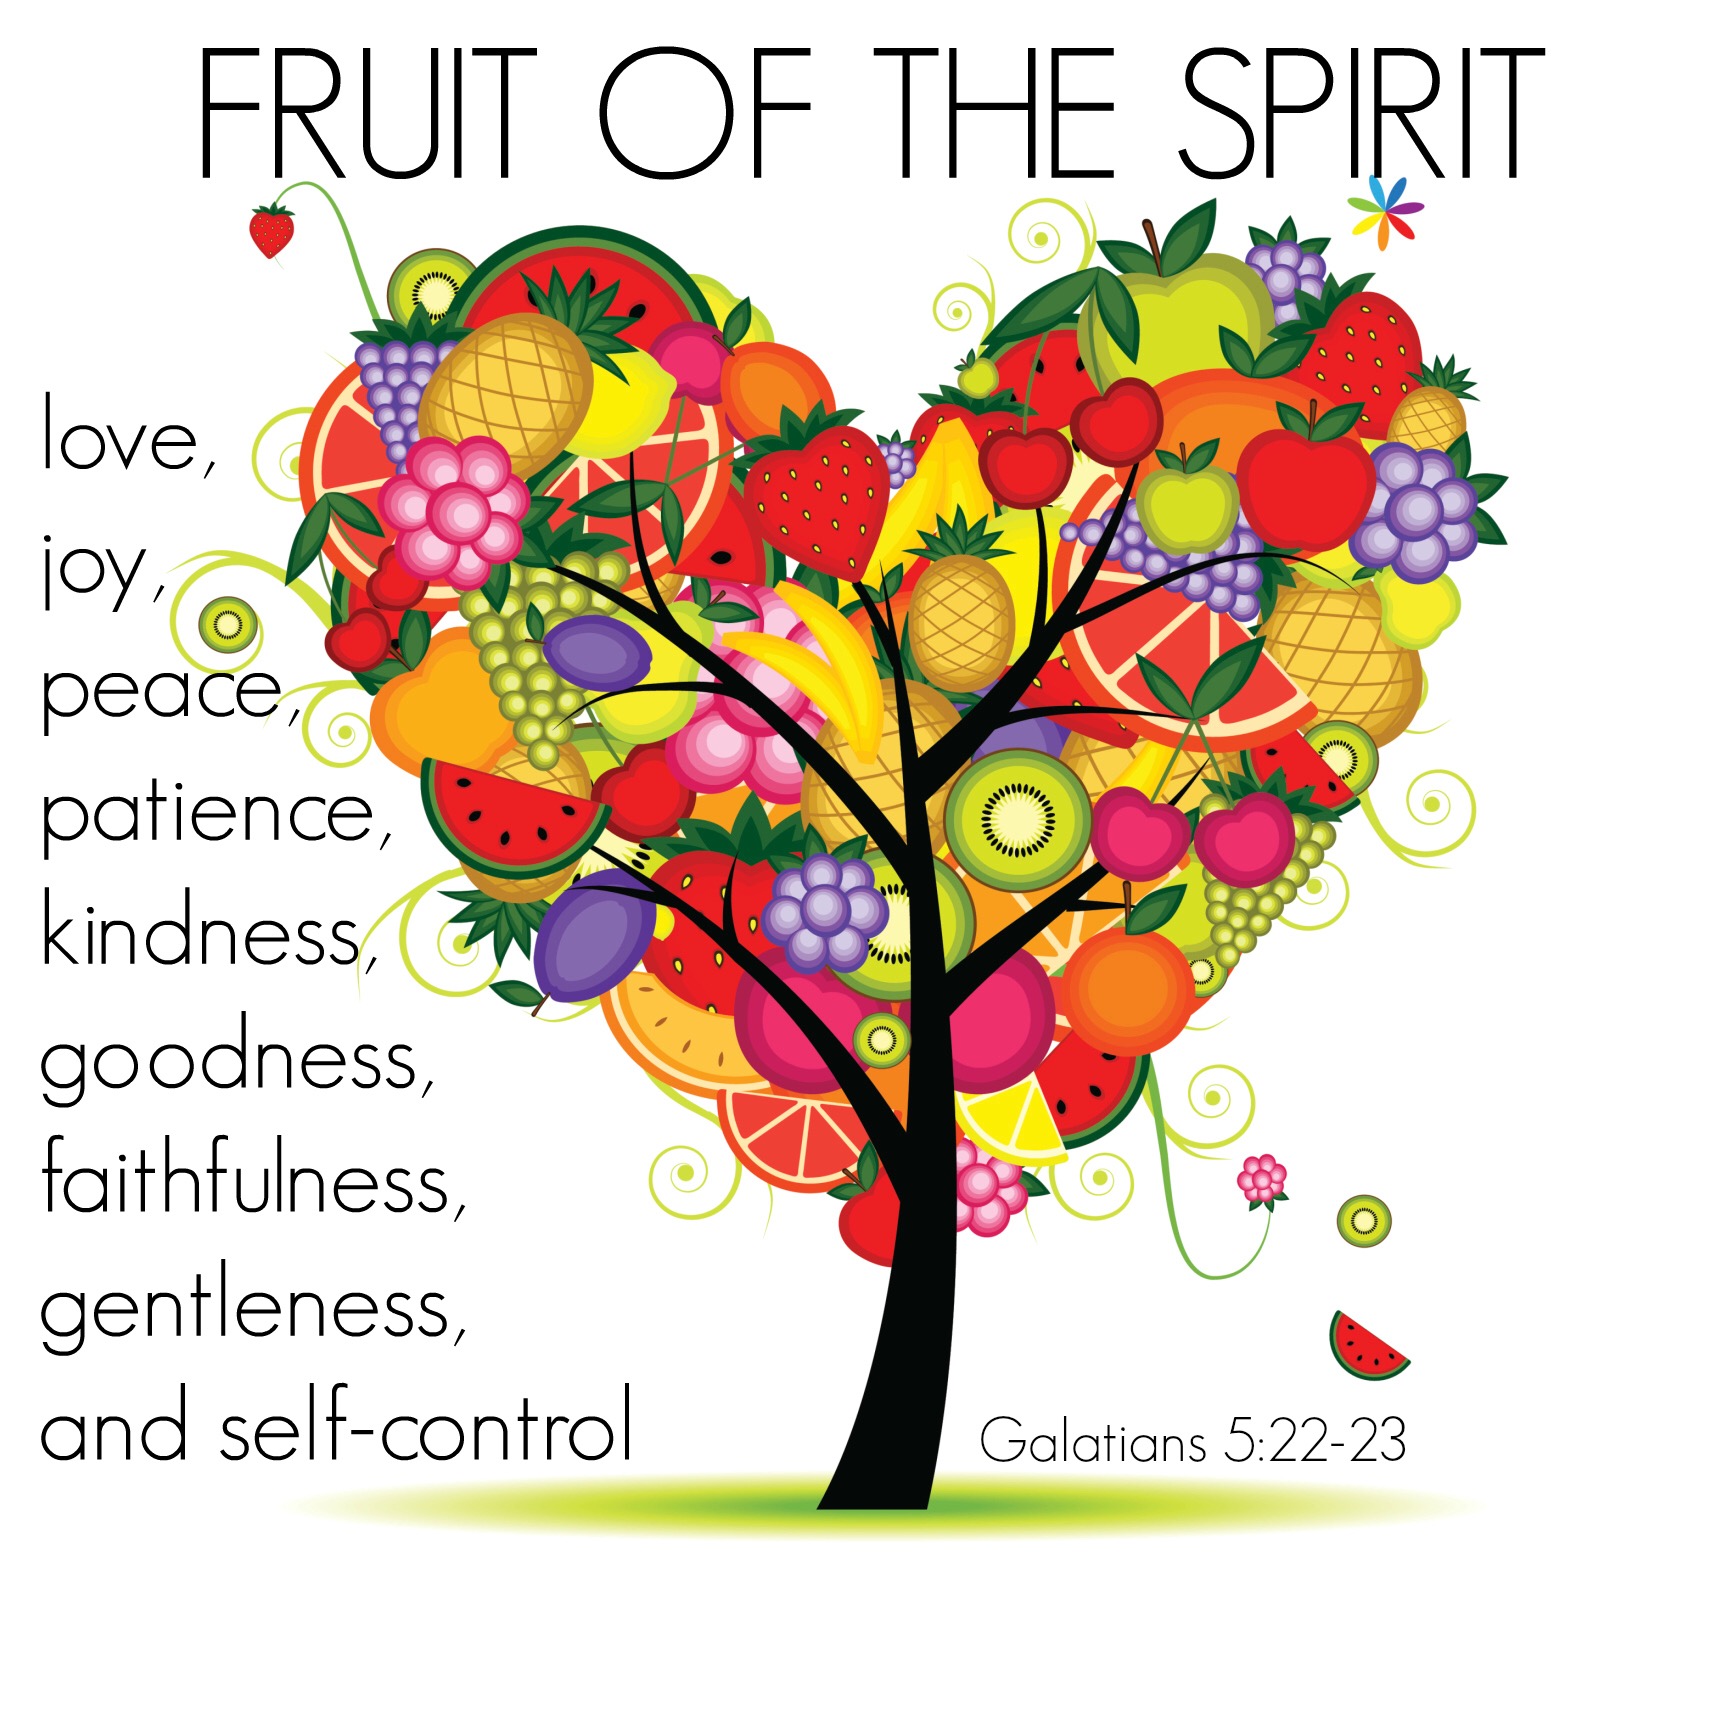 What Are The 5 Fruits Of The Spirit